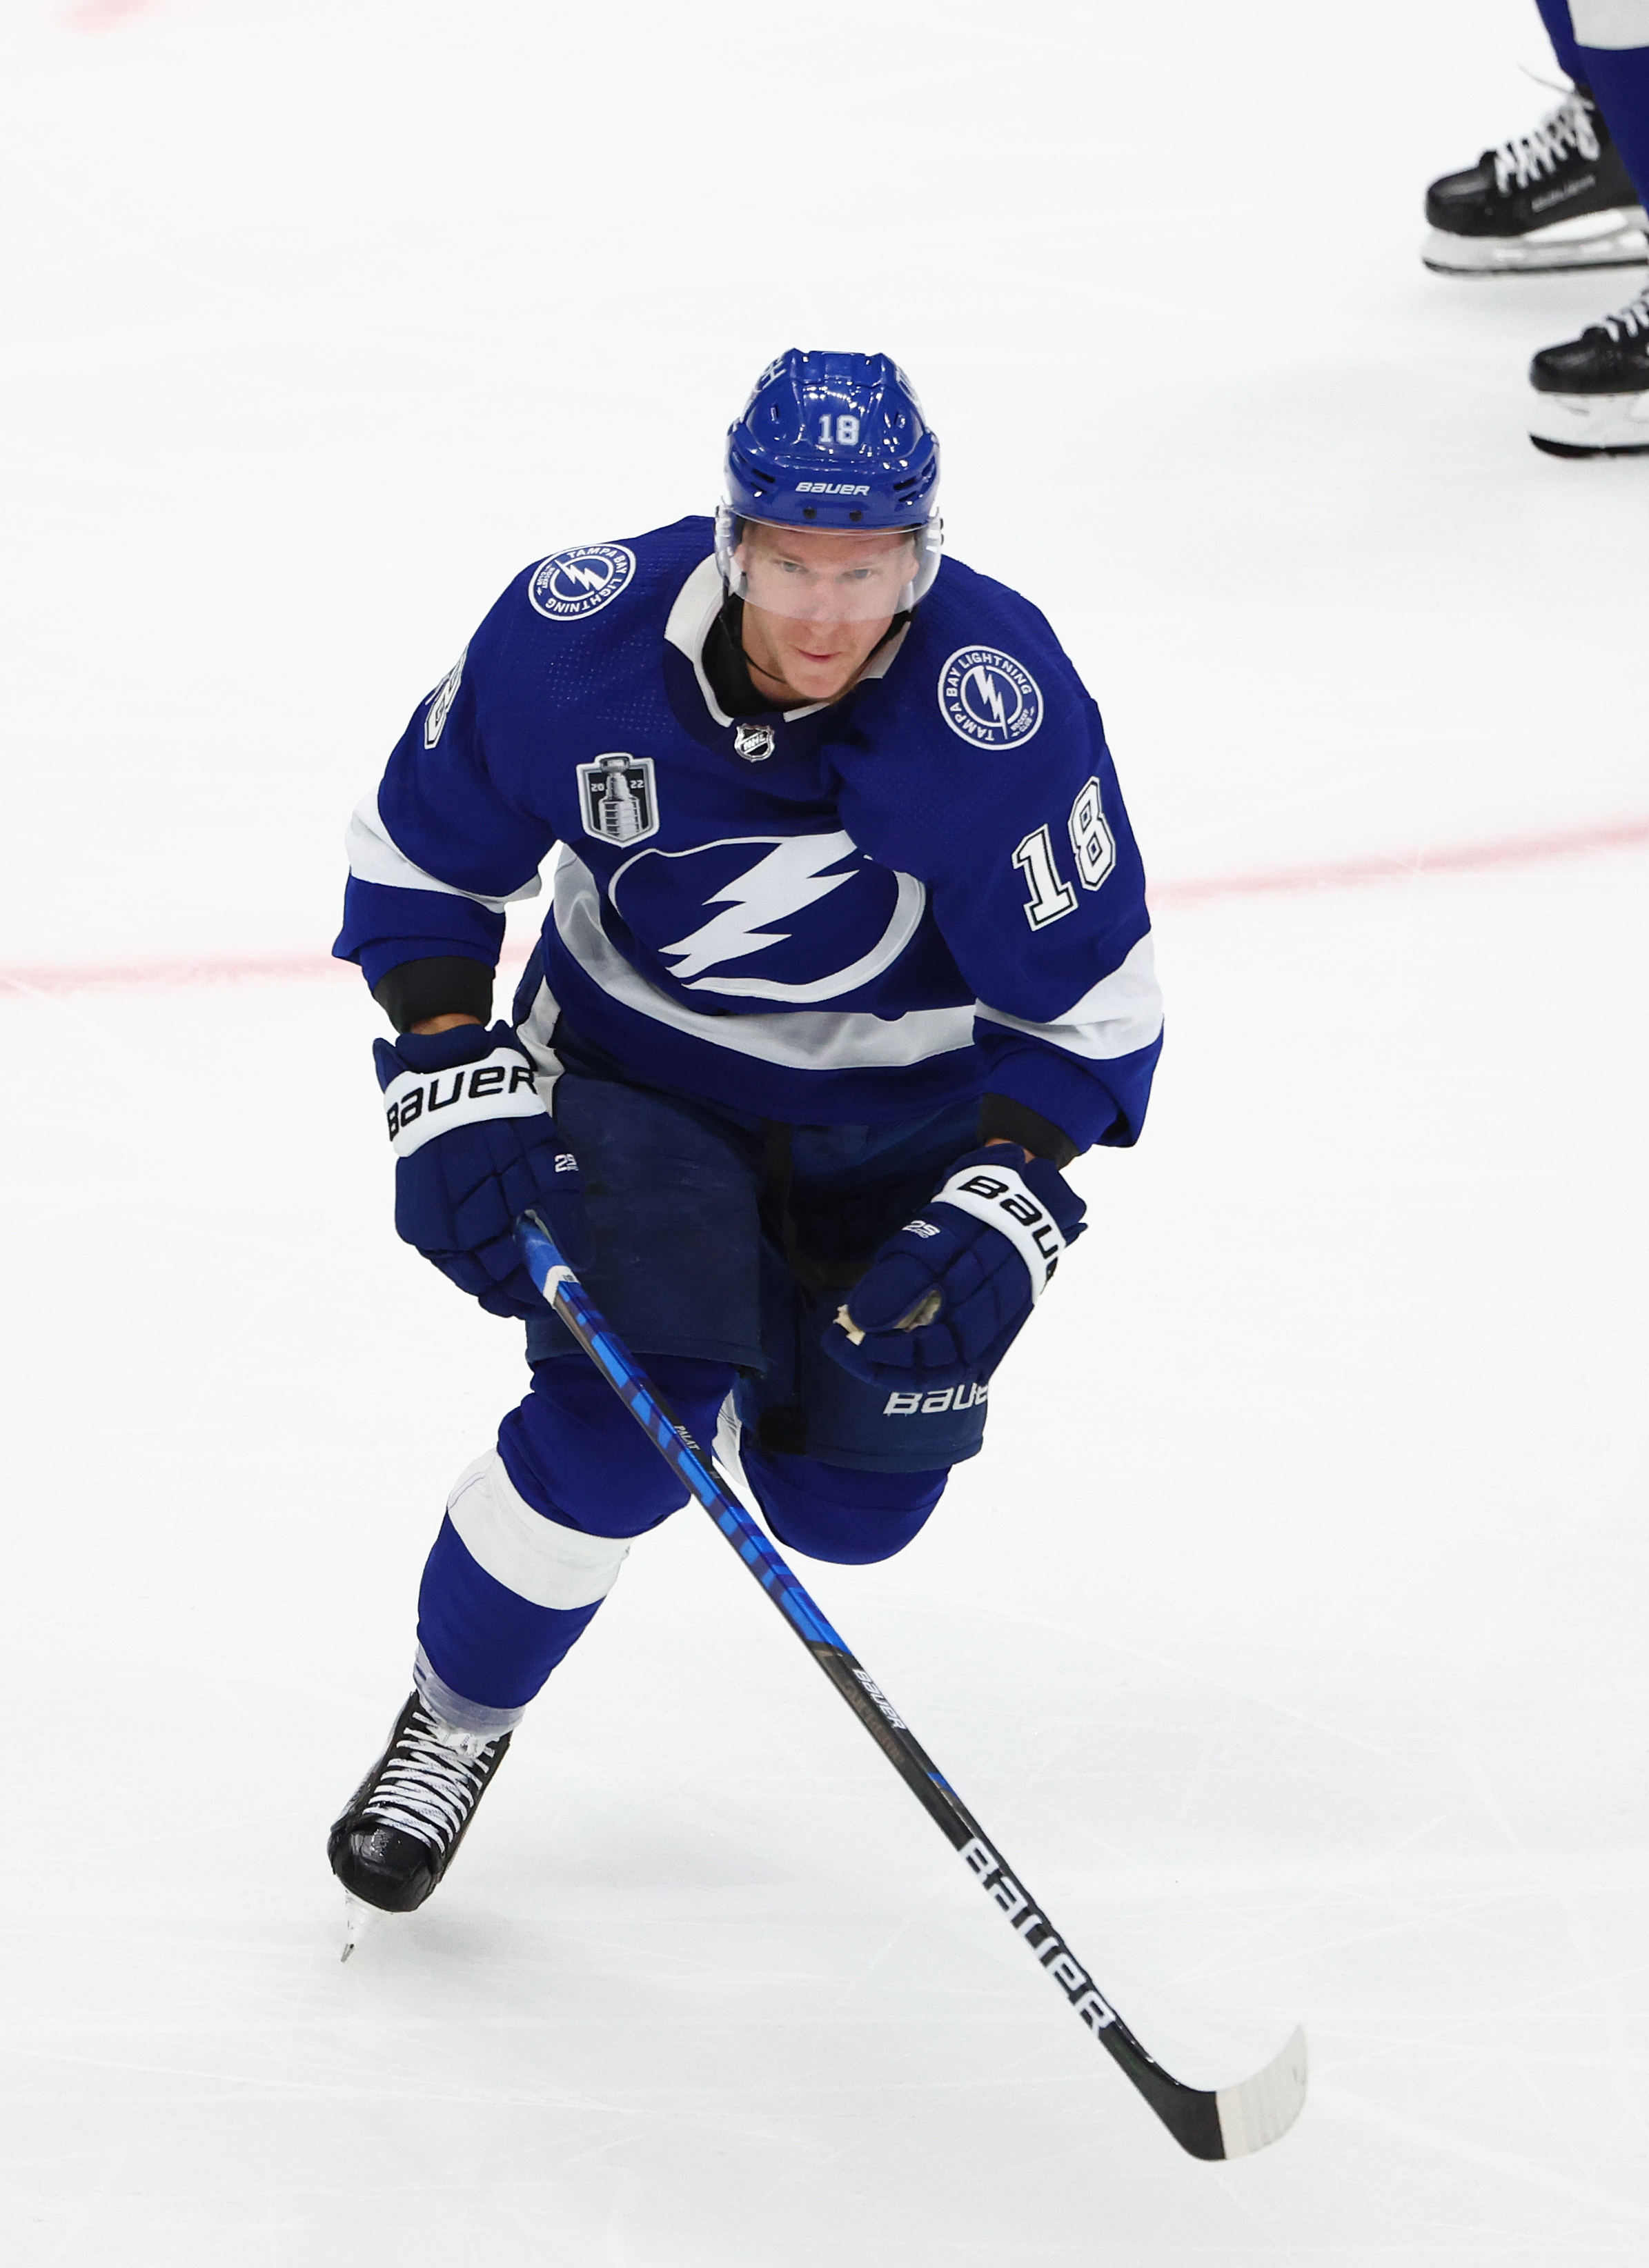 Tampa Bay Lightning will be fine, as they always are